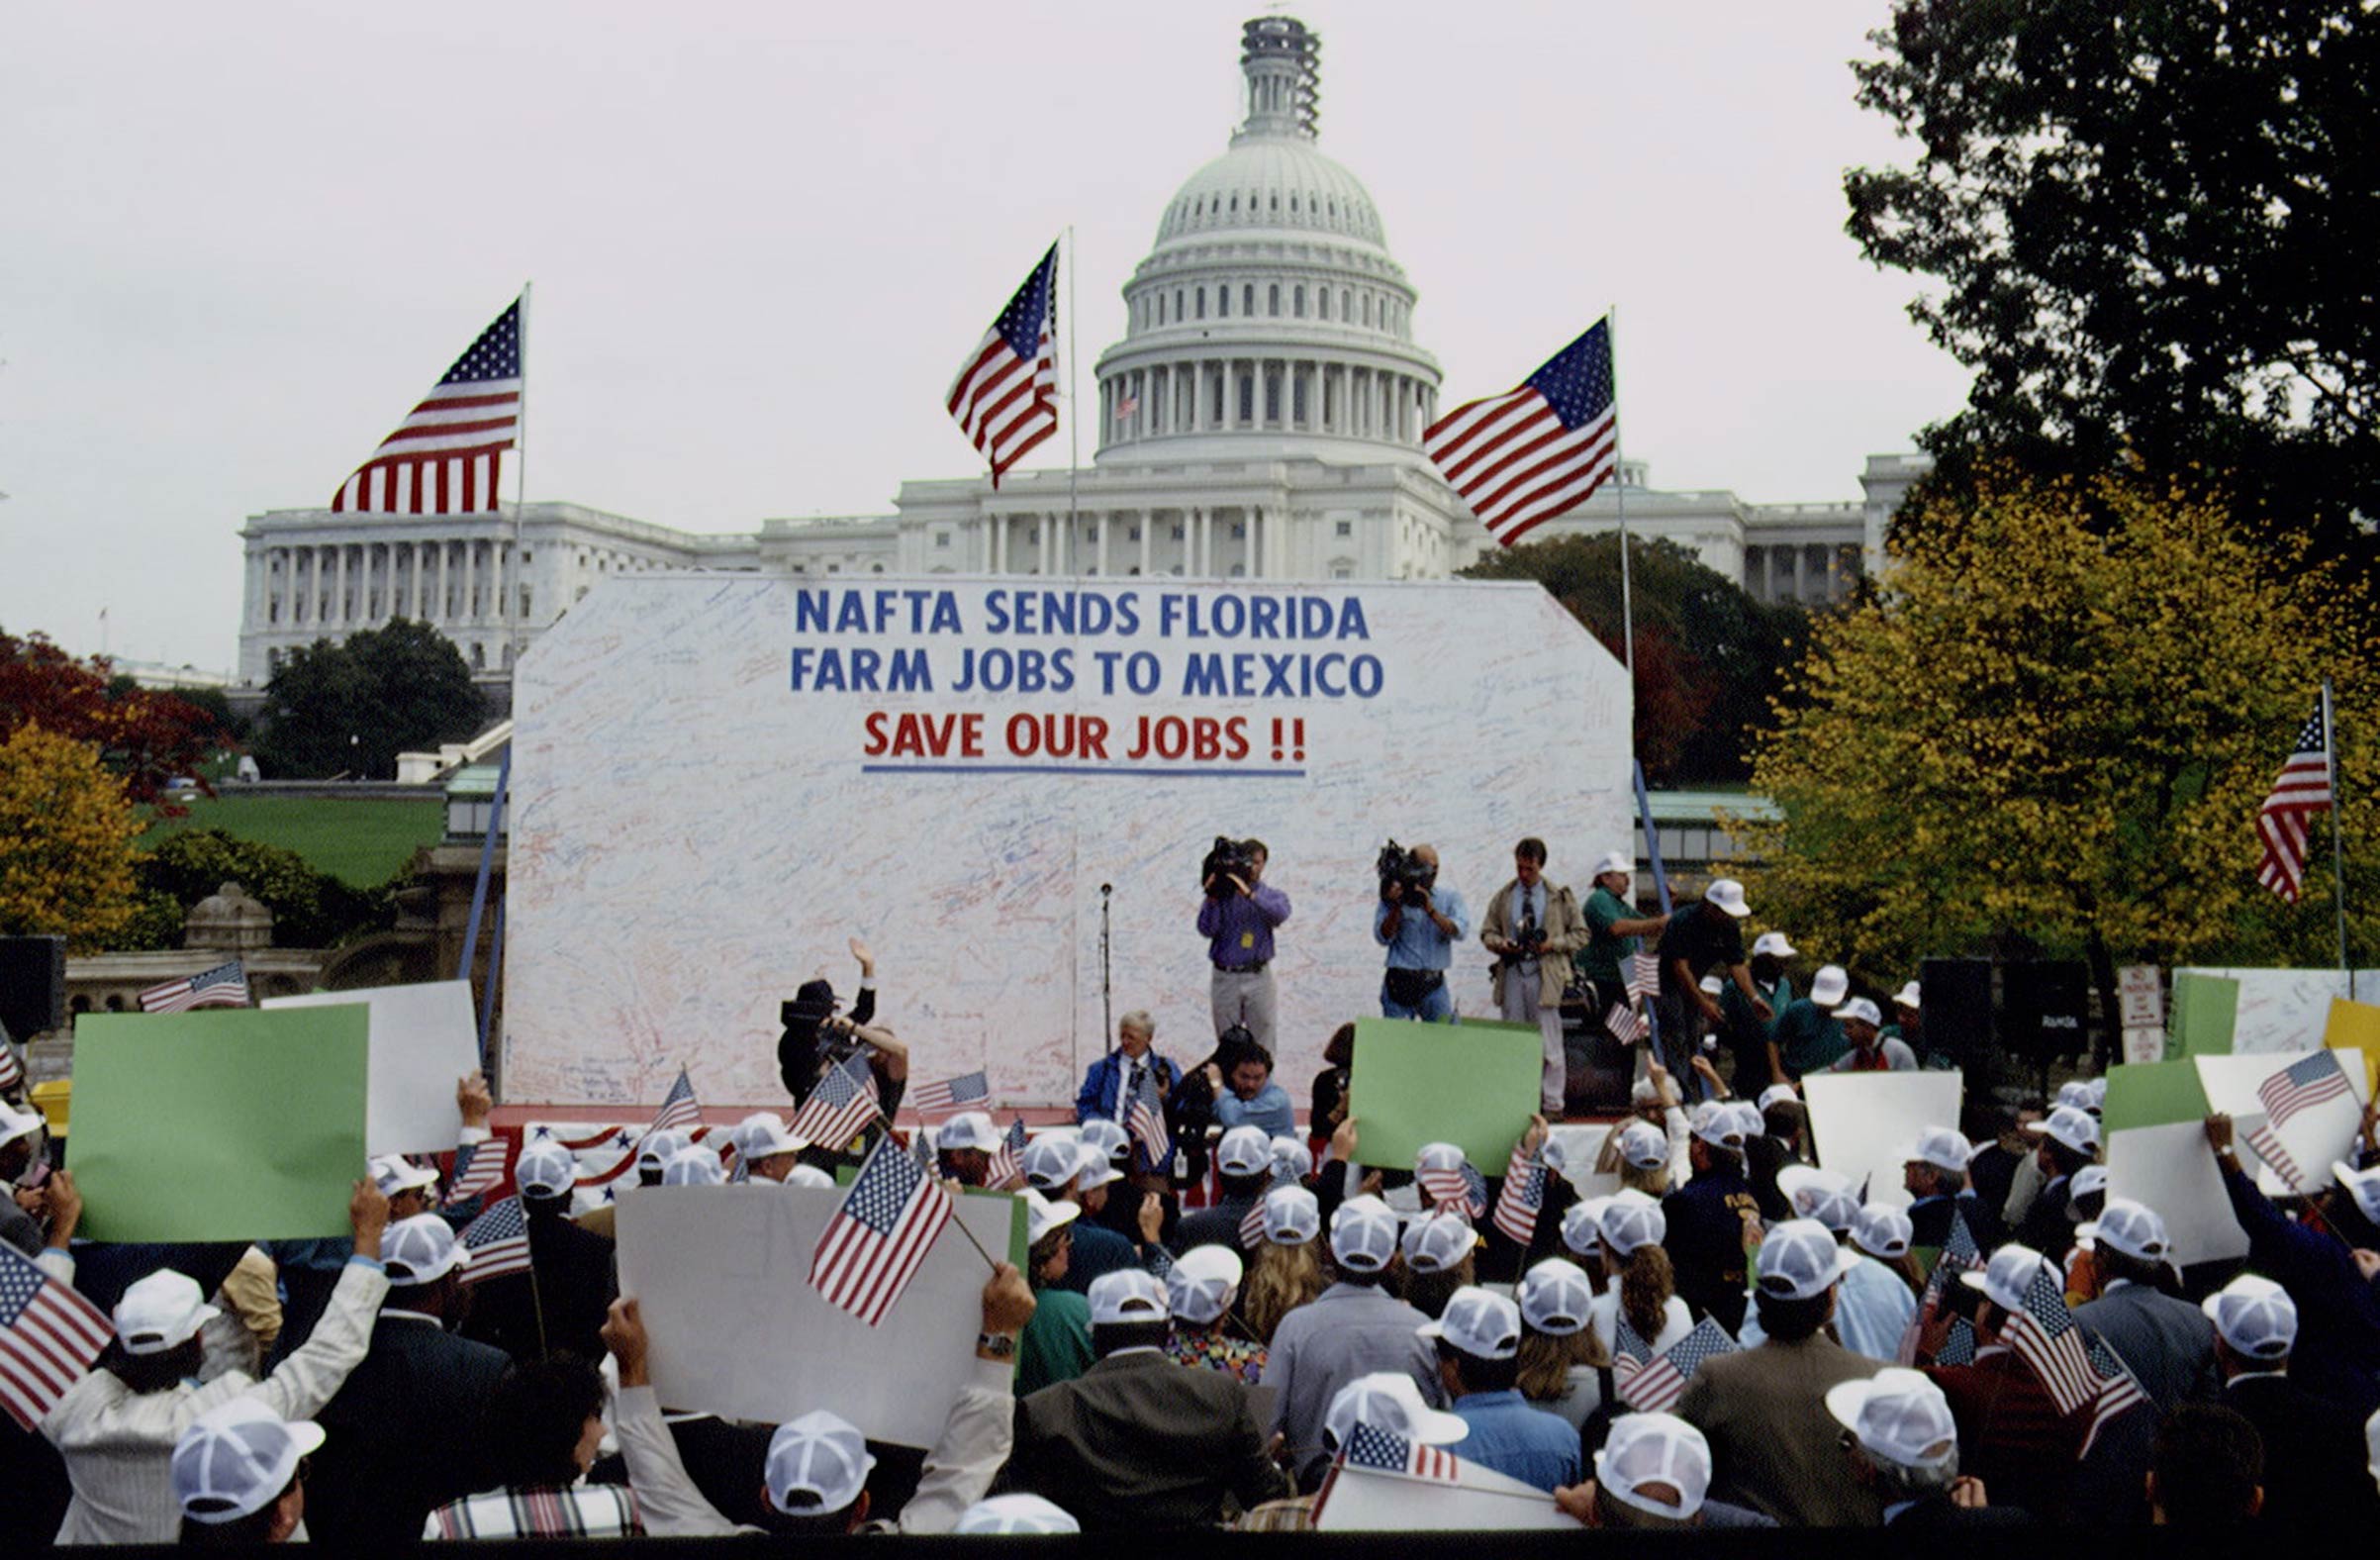 A farmer protest against NAFTA on Oct. 21, 1993, in front of the Capitol in Washington, D.C. (Jeffrey Markowitz/Sygma —Getty Images)